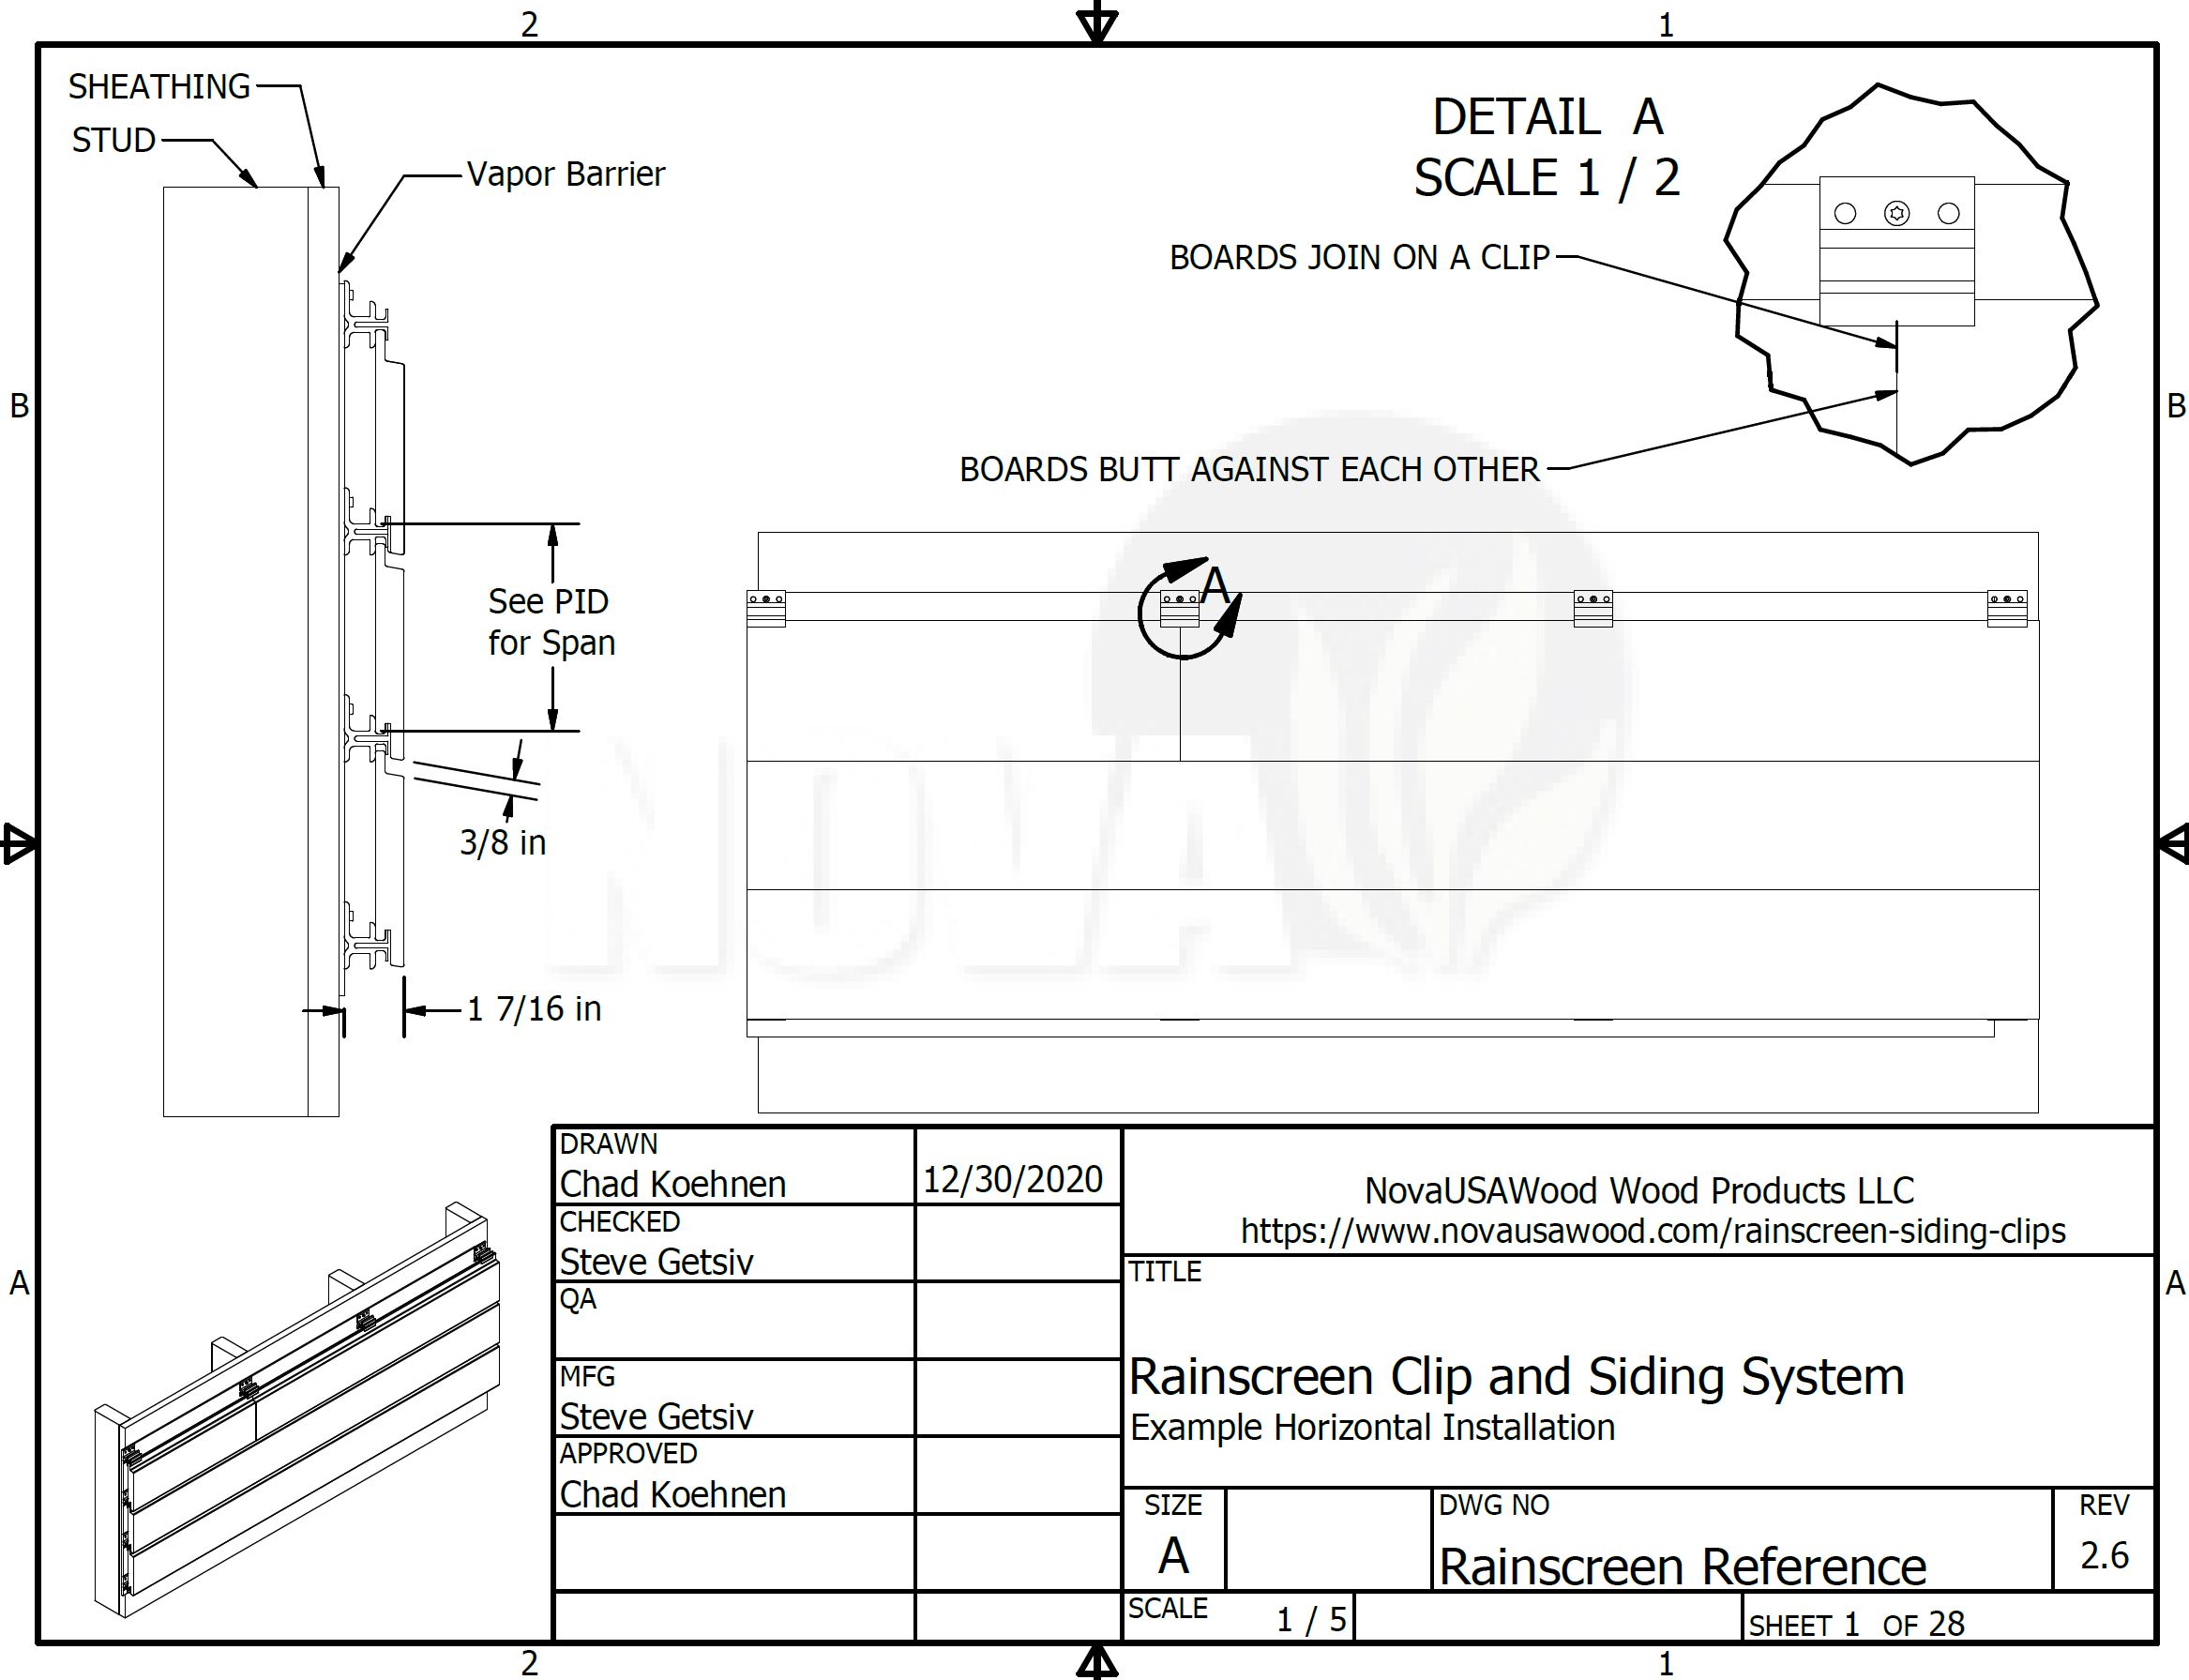 Rainscreen Clip and Siding System Reference Drawings